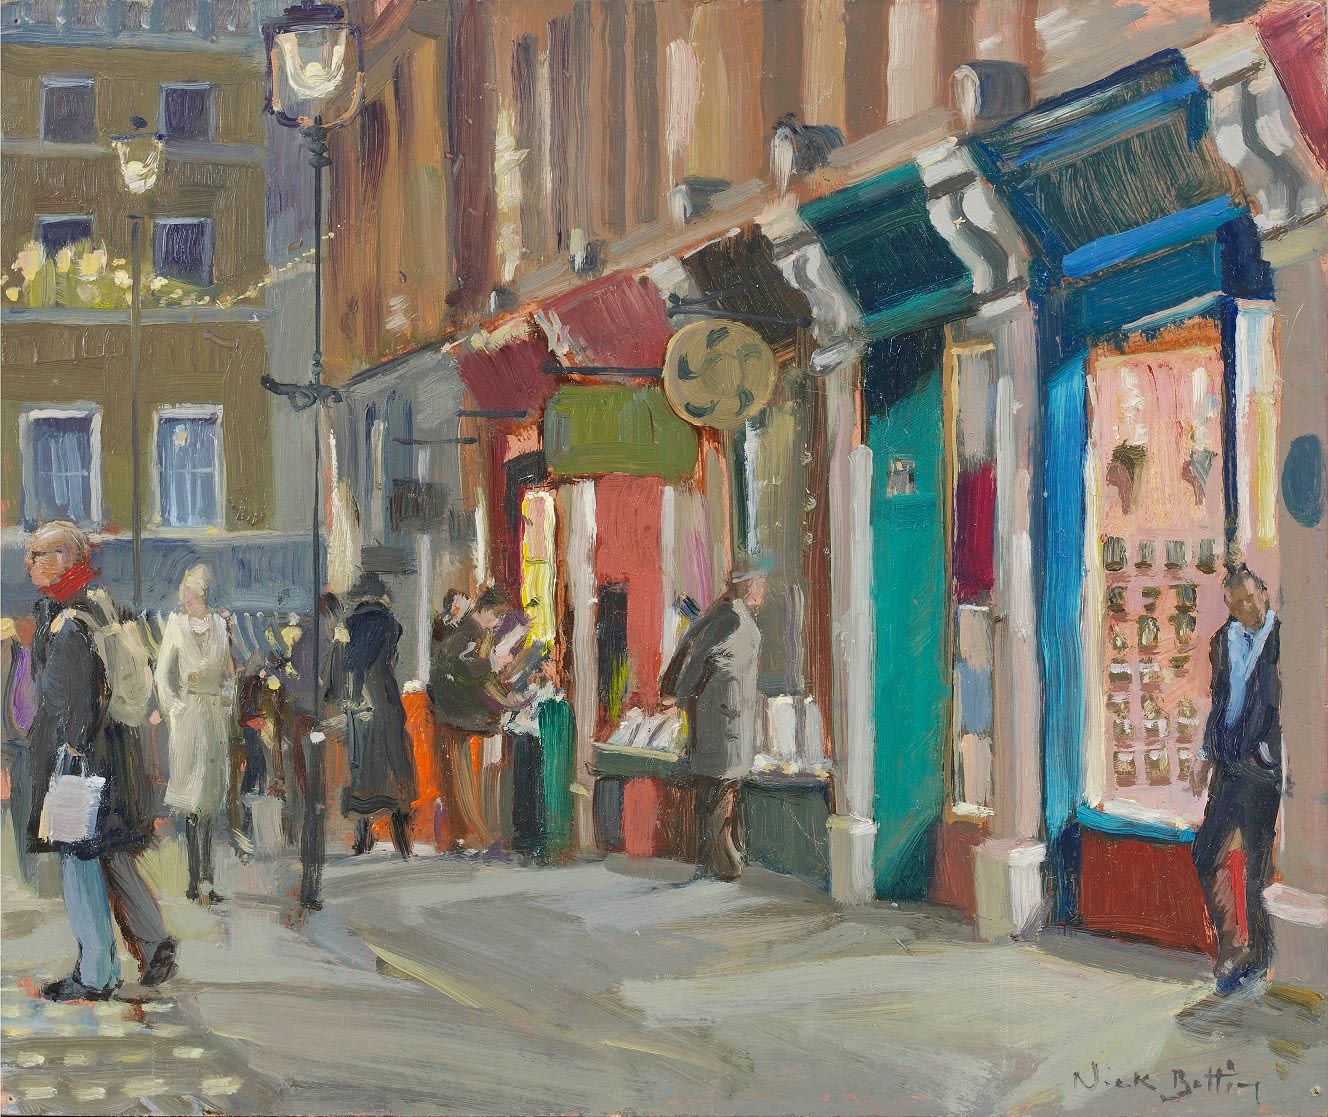 Nick Botting, Christmas Shoppers, Cecil Court